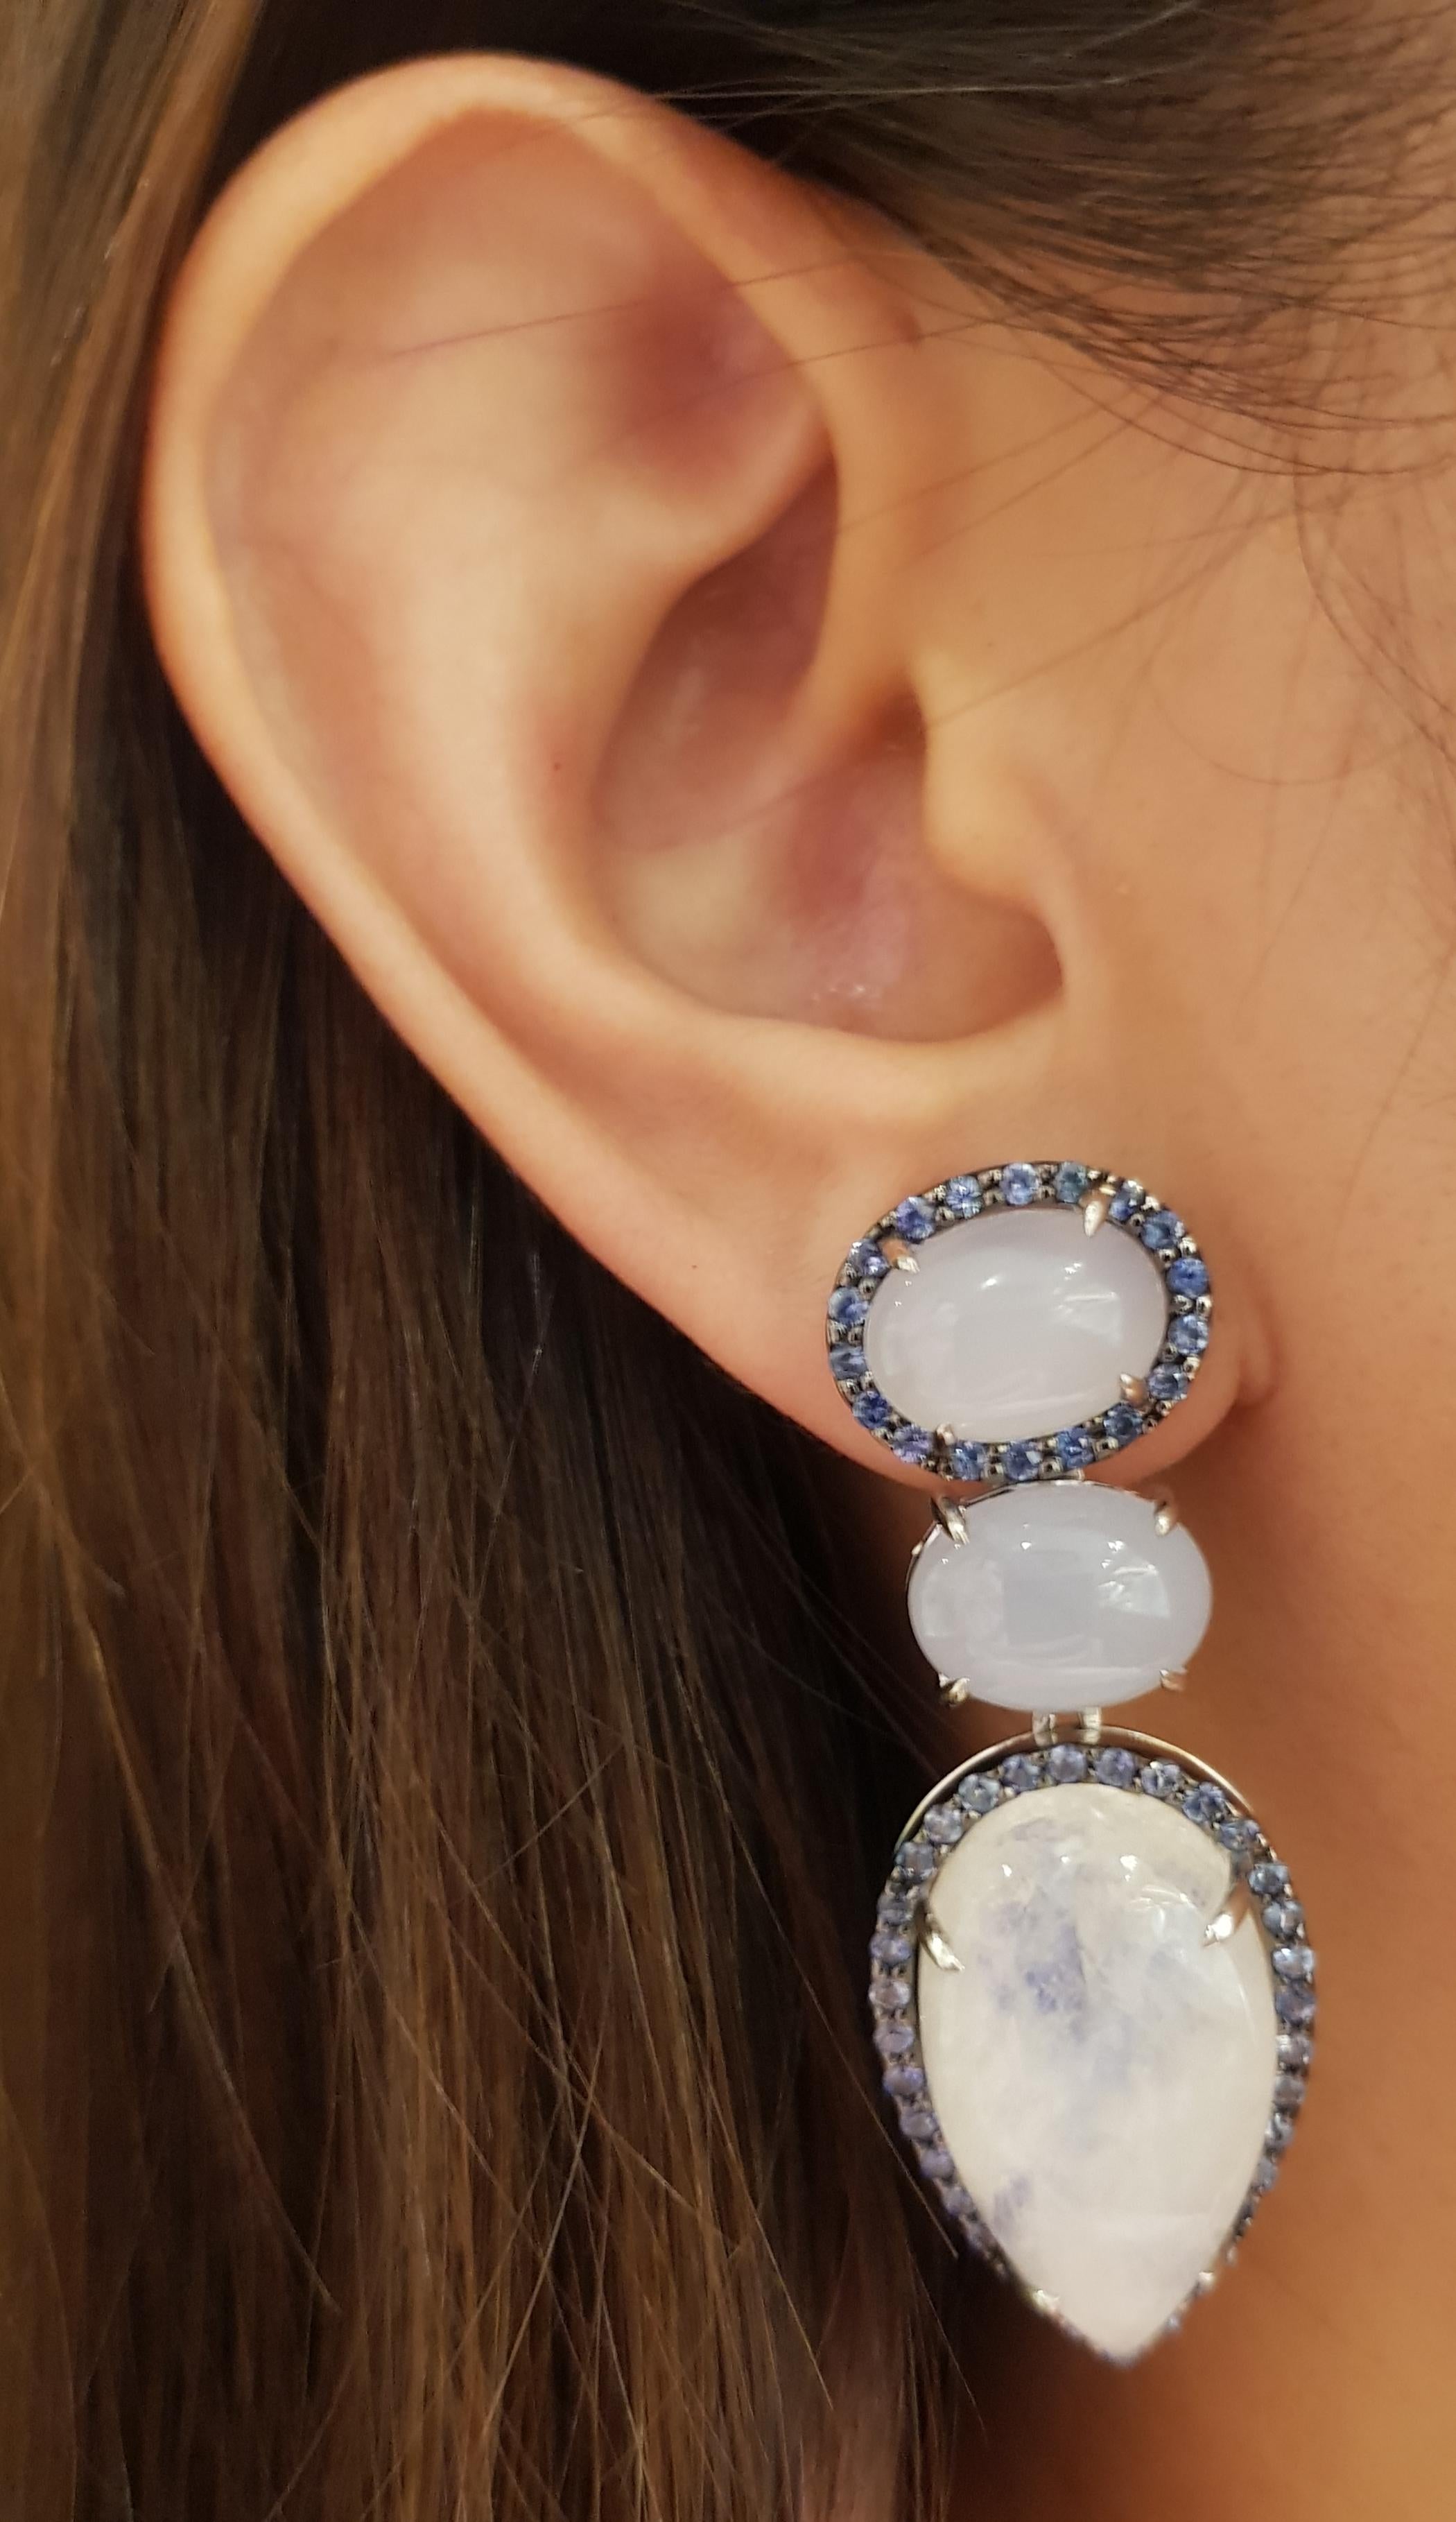 Chalcedony, Moonstone and Blue Sapphire Earrings set in Silver Settings

Width: 1.8 cm 
Length: 5.0 cm
Total Weight: 24.56  grams

*Please note that the silver setting is plated with rhodium to promote shine and help prevent oxidation.  However,